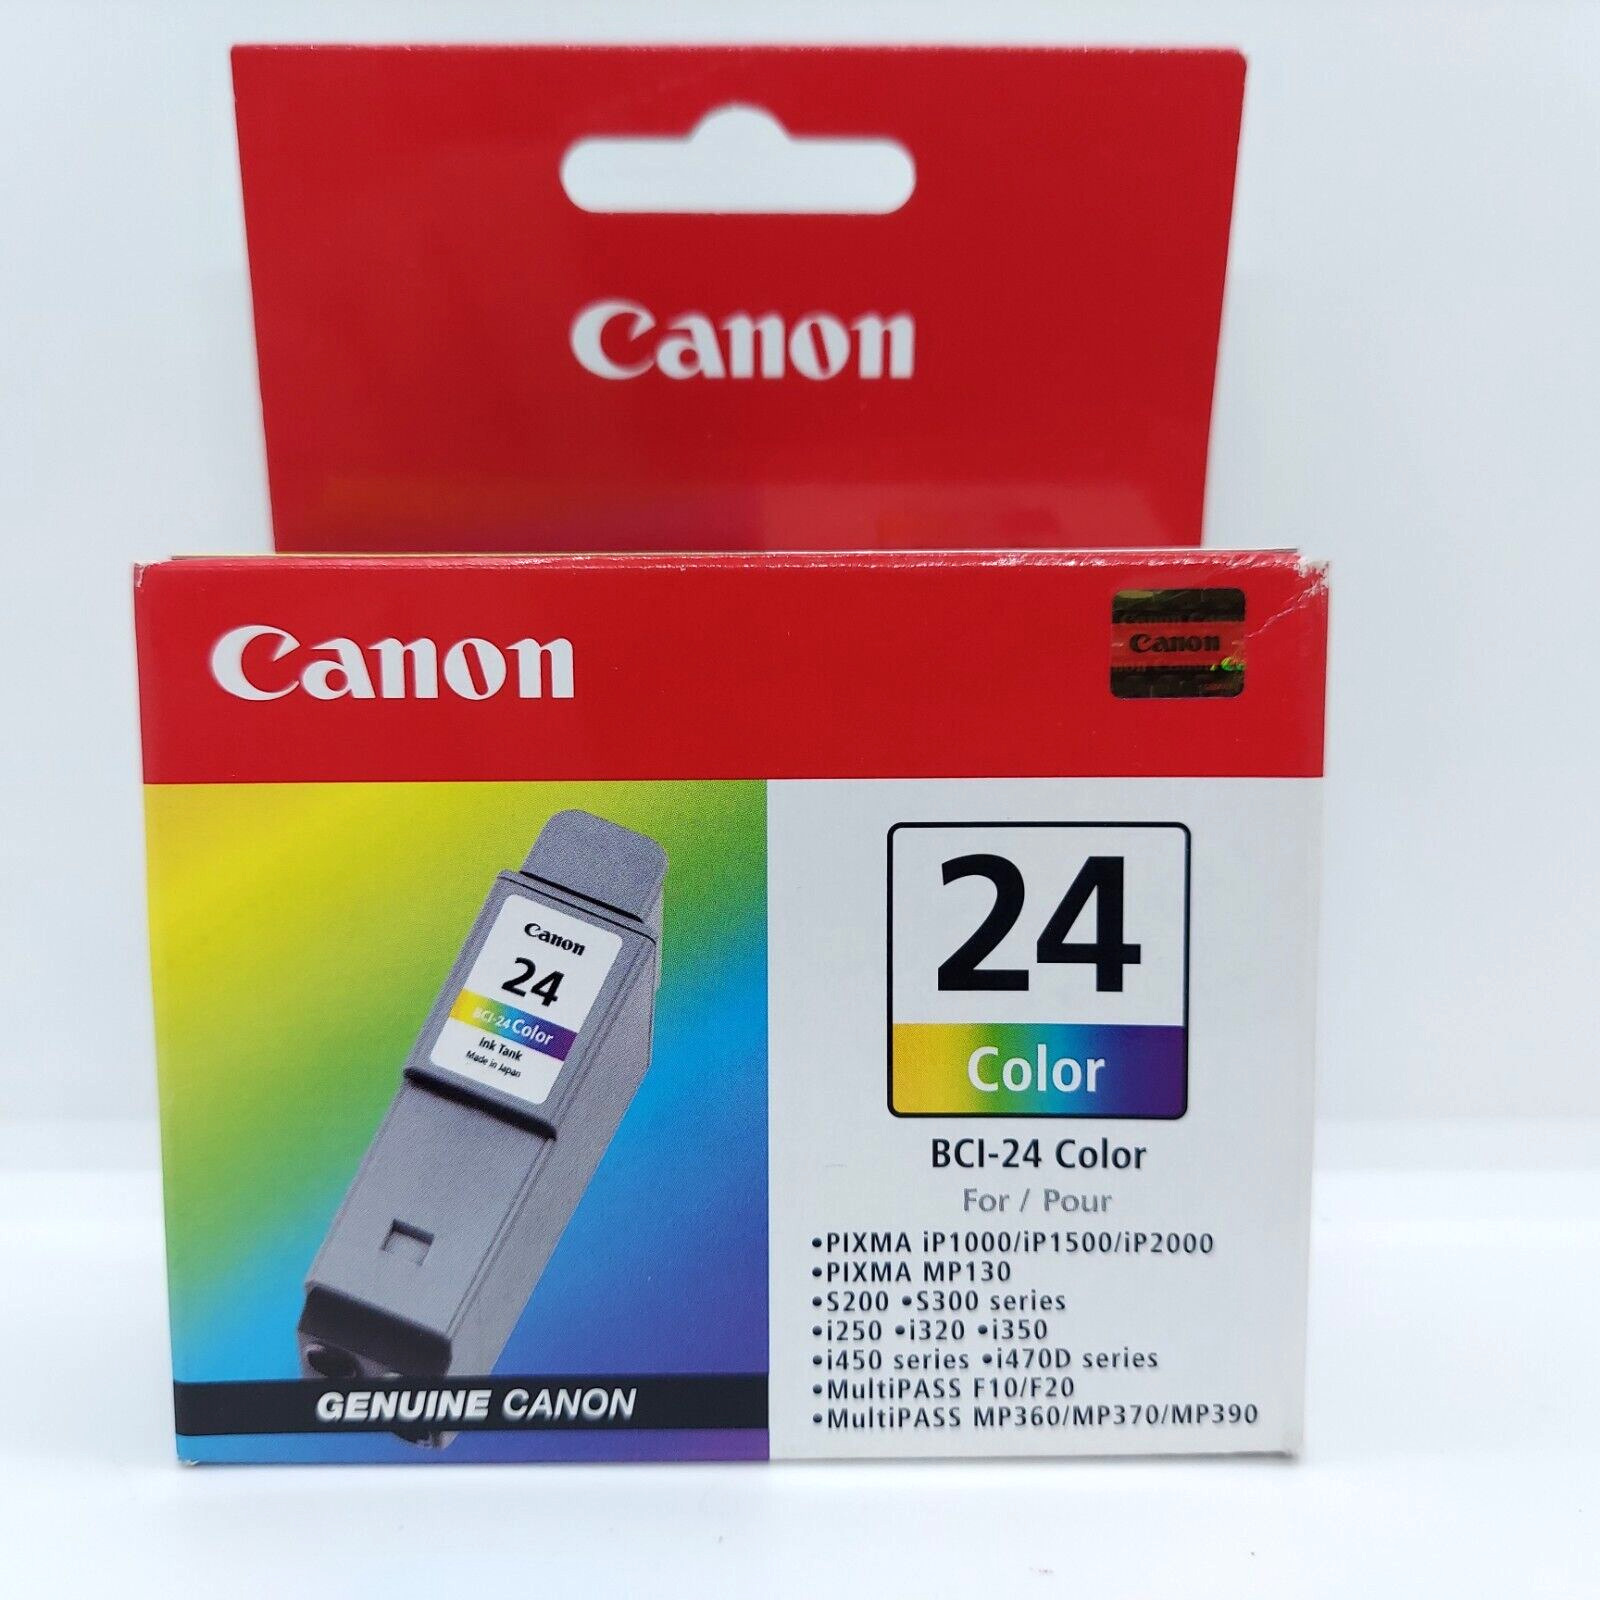 Genuine Canon BCI-24 Color Ink Cartridge Brand New in Box